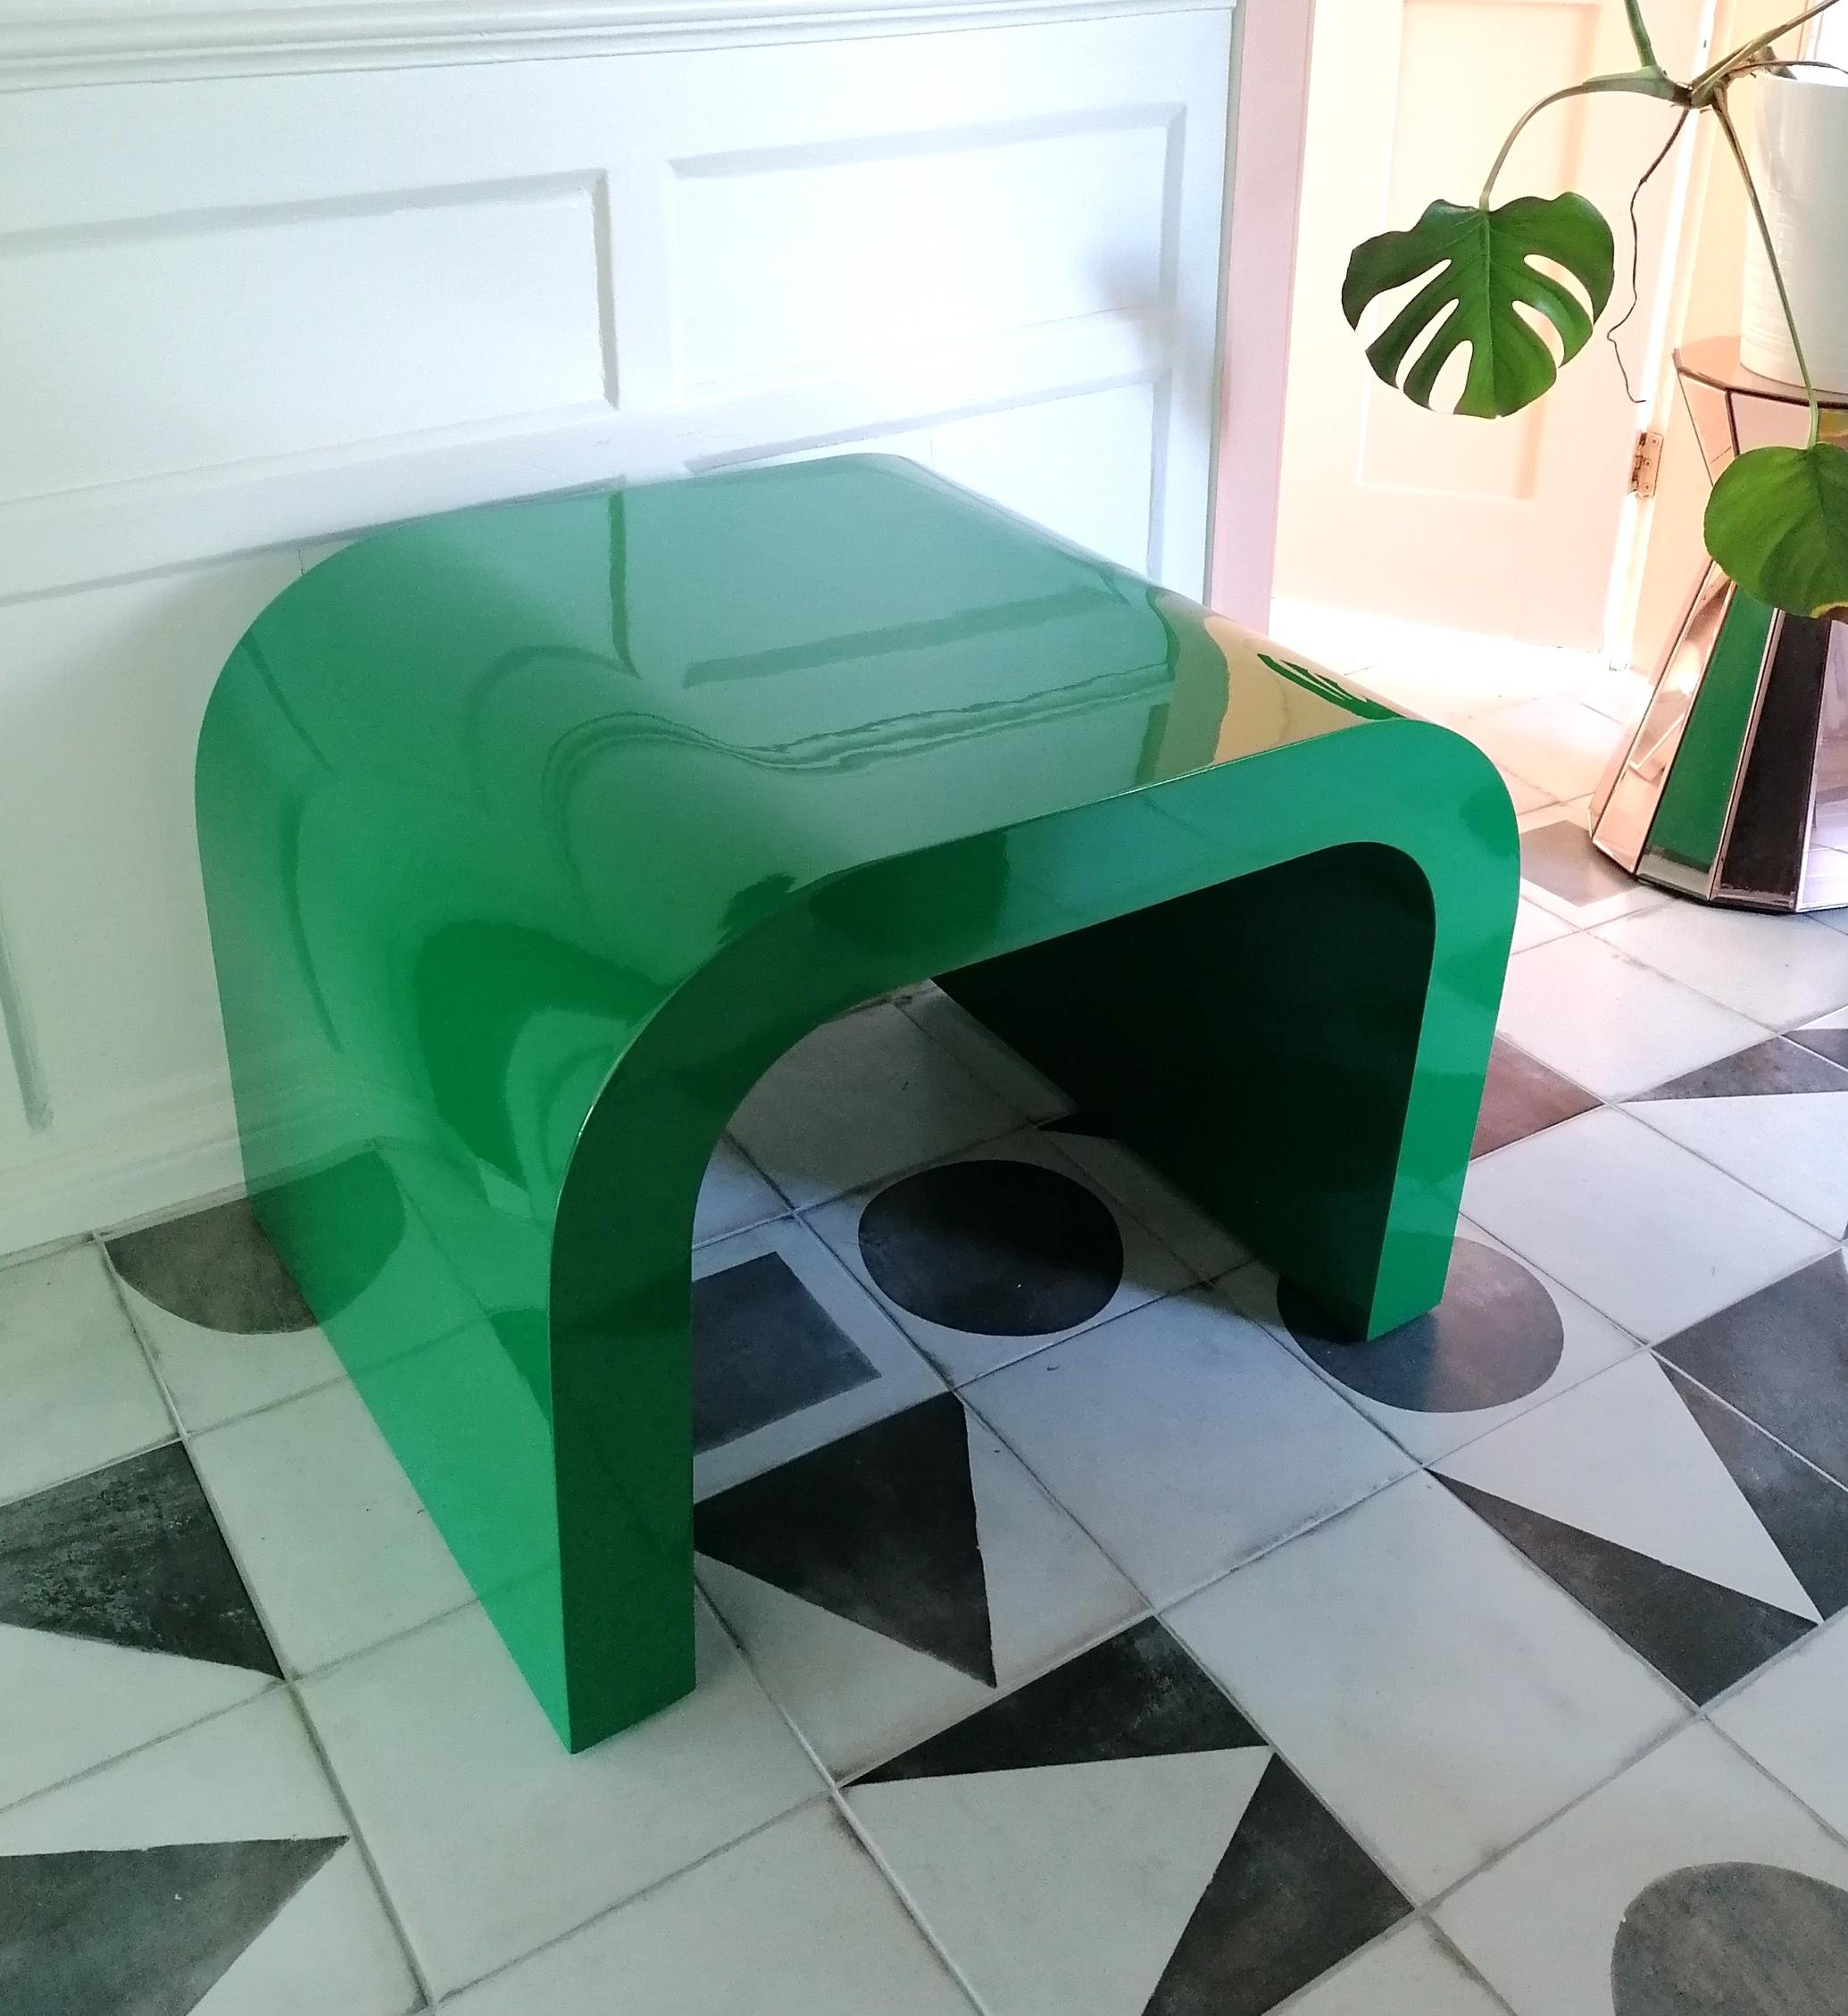 Postmodern American emerald green lacquered waterfall side or coffee table, circa 1980s. In excellent condition. Quite light in weight- I think it's lacquered compressed wood, rather than solid wood.

Dimensions: width 69cm, depth 56.5cm, height